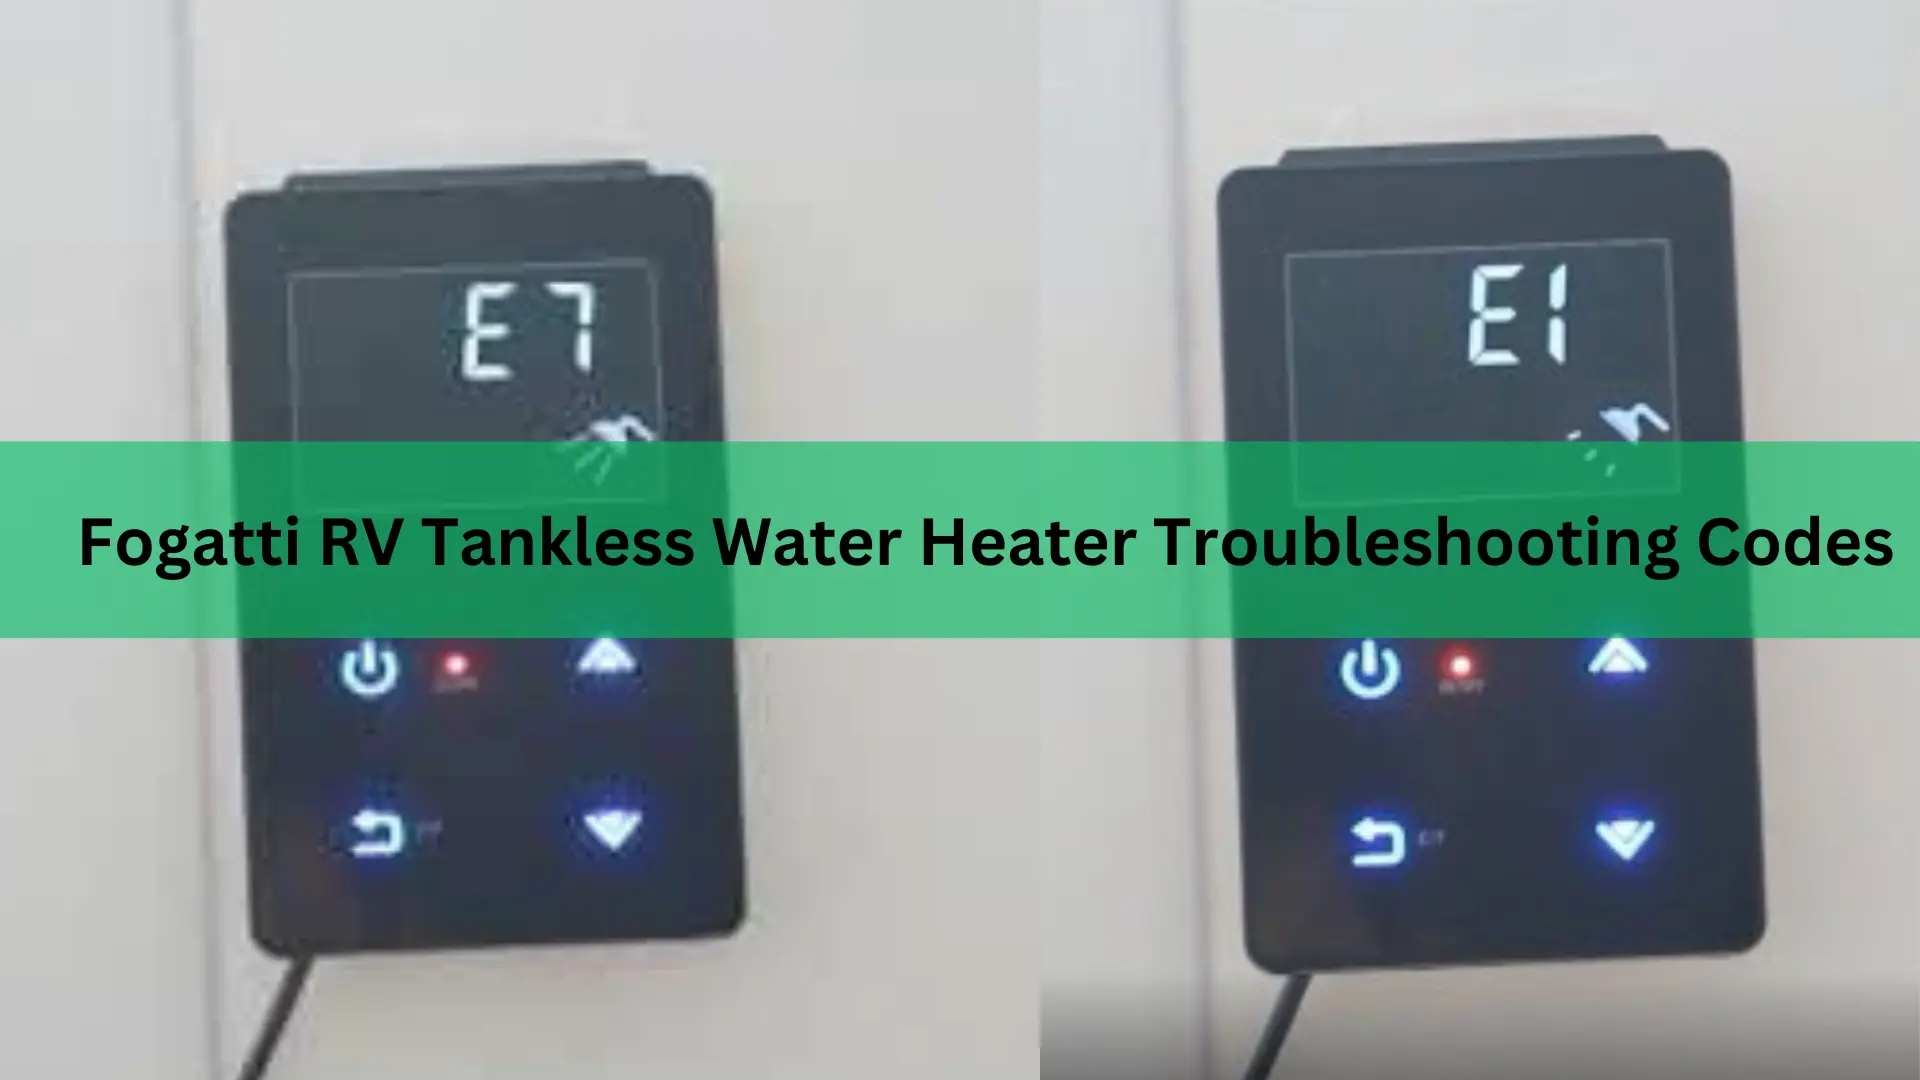 Fogatti rv tankless water heater troubleshooting codes